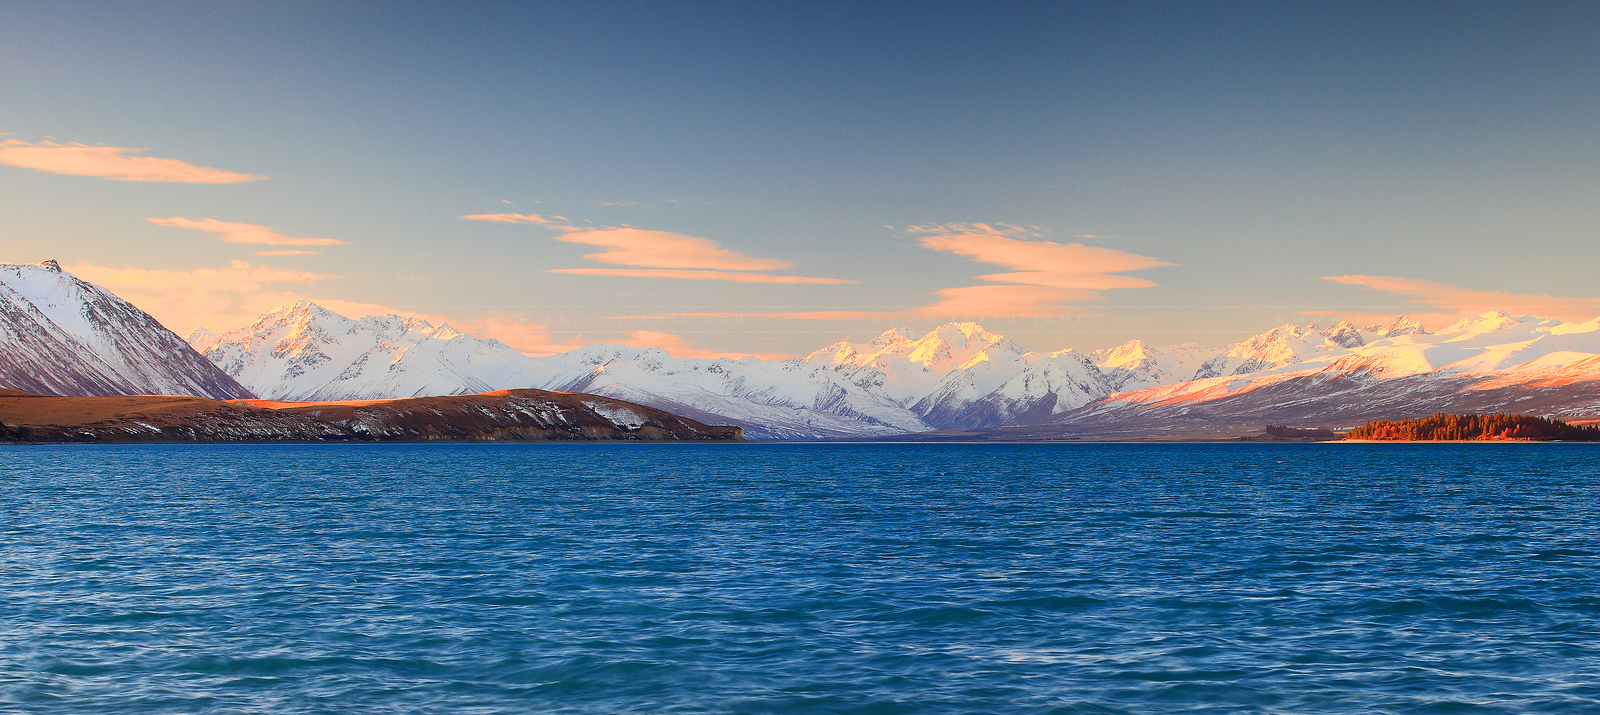 Snow-capped Mountains of The Southern Alps